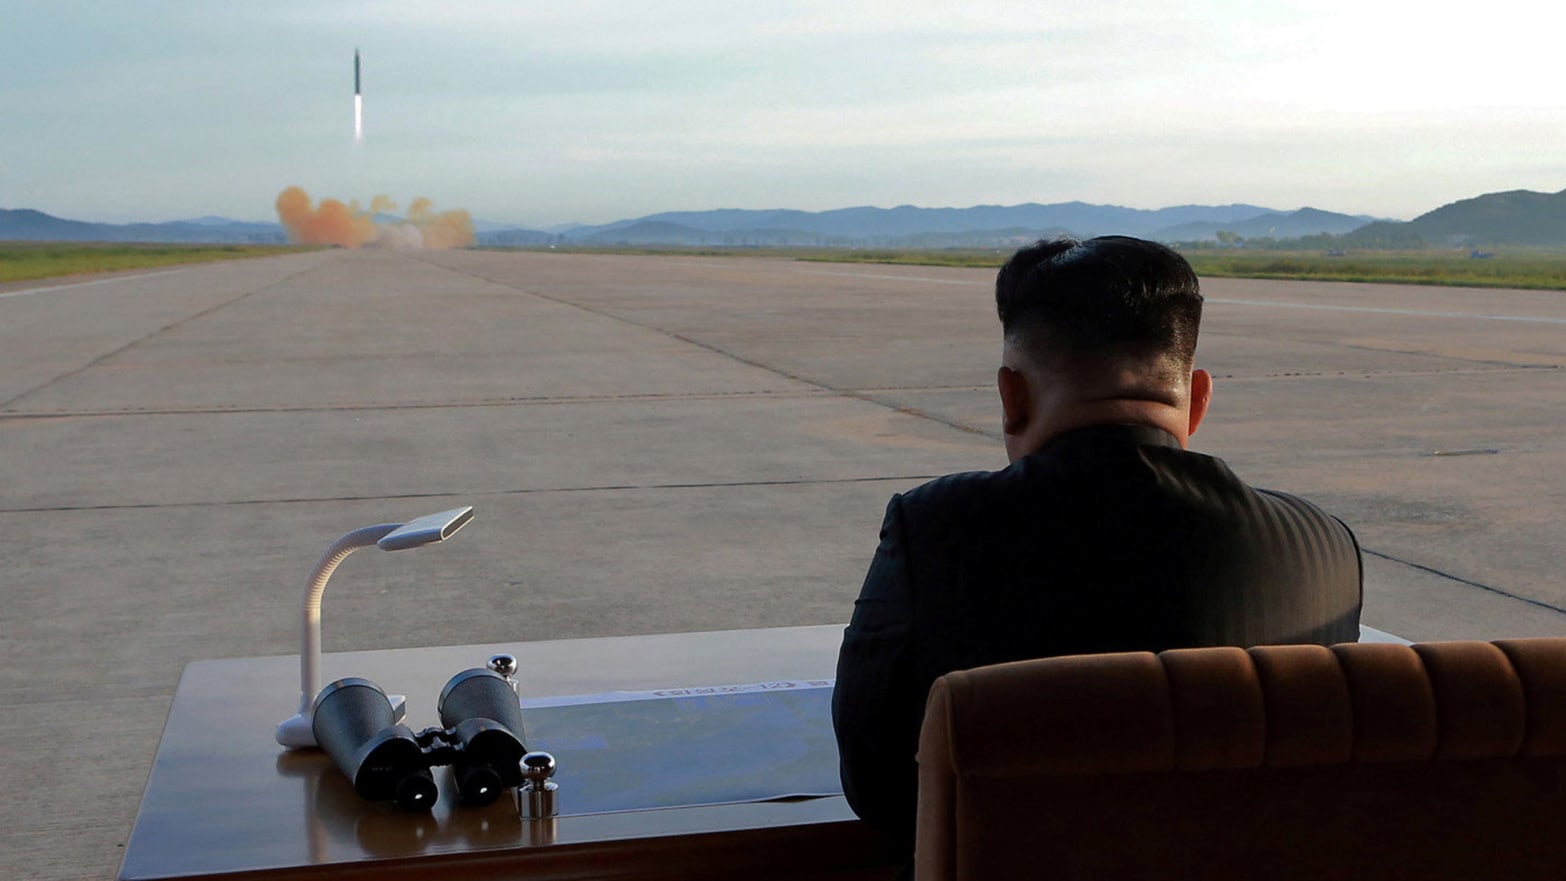 North Korean leader Kim Jong Un watches the launch of a Hwasong-12 missile.